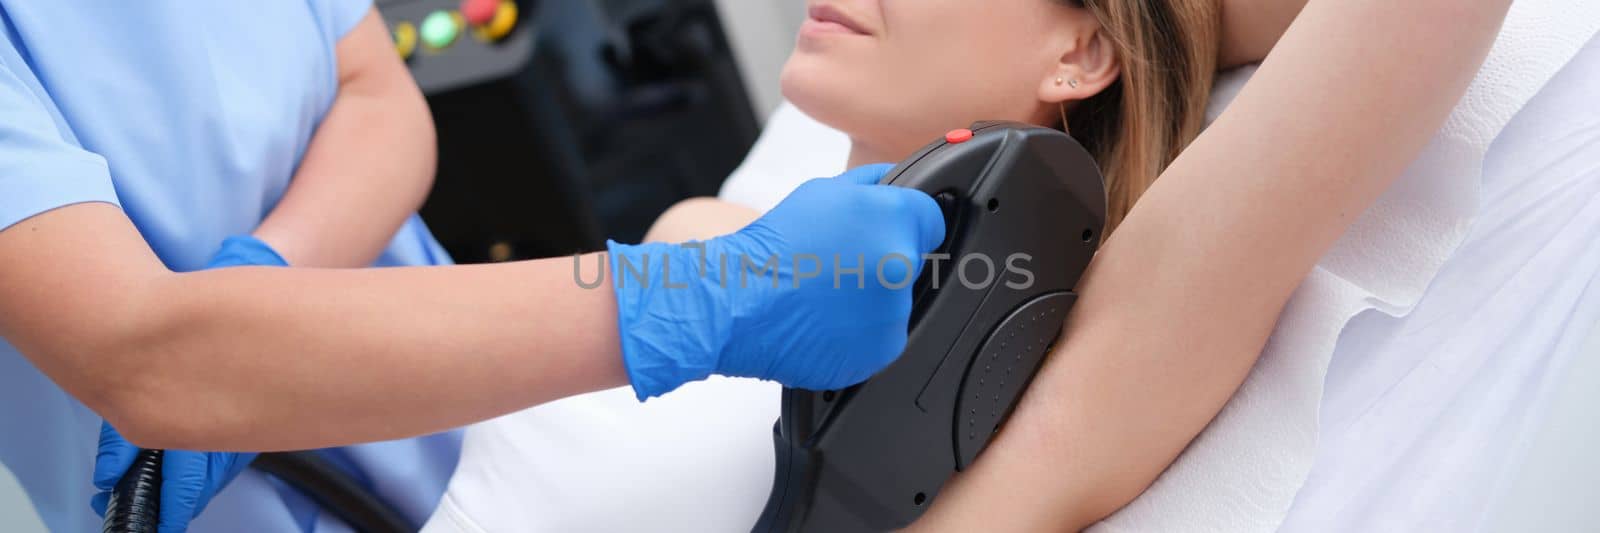 Woman undergoes hair removal procedure with photoepilator or laser hair removal of armpits in salon. Armpit laser hair removal concept